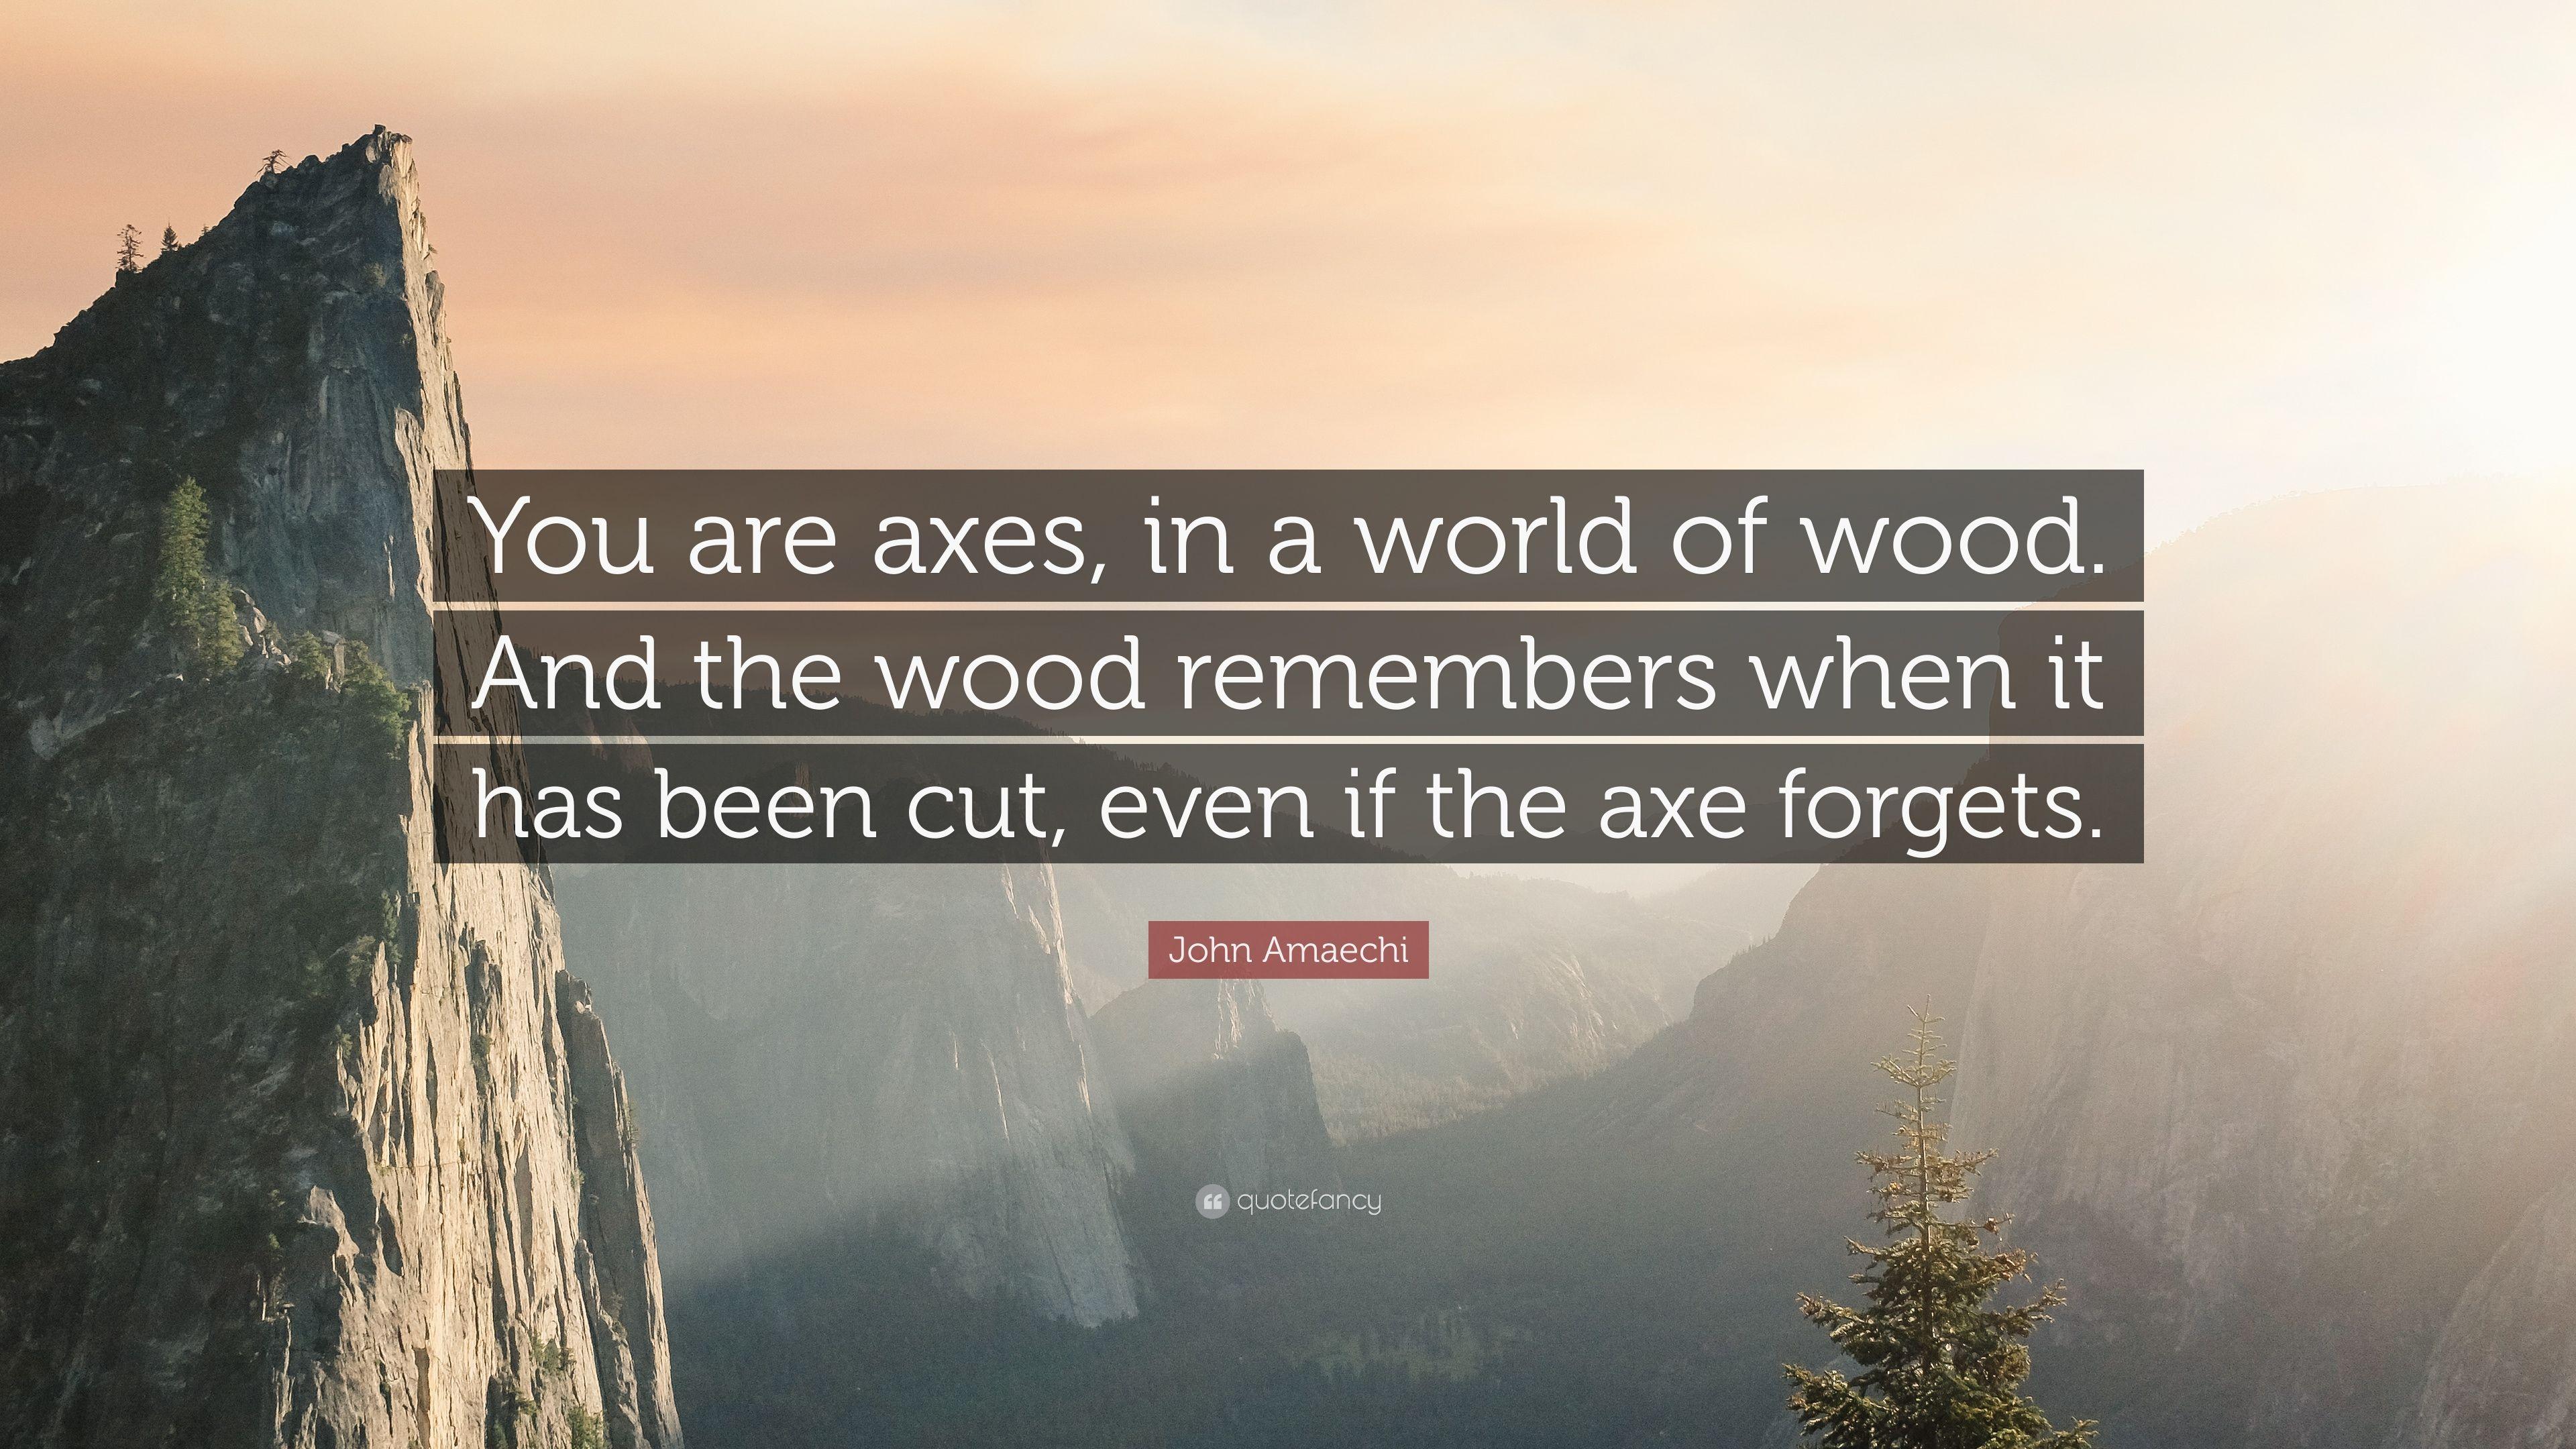 John Amaechi Quote: “You are axes, in a world of wood. And the wood